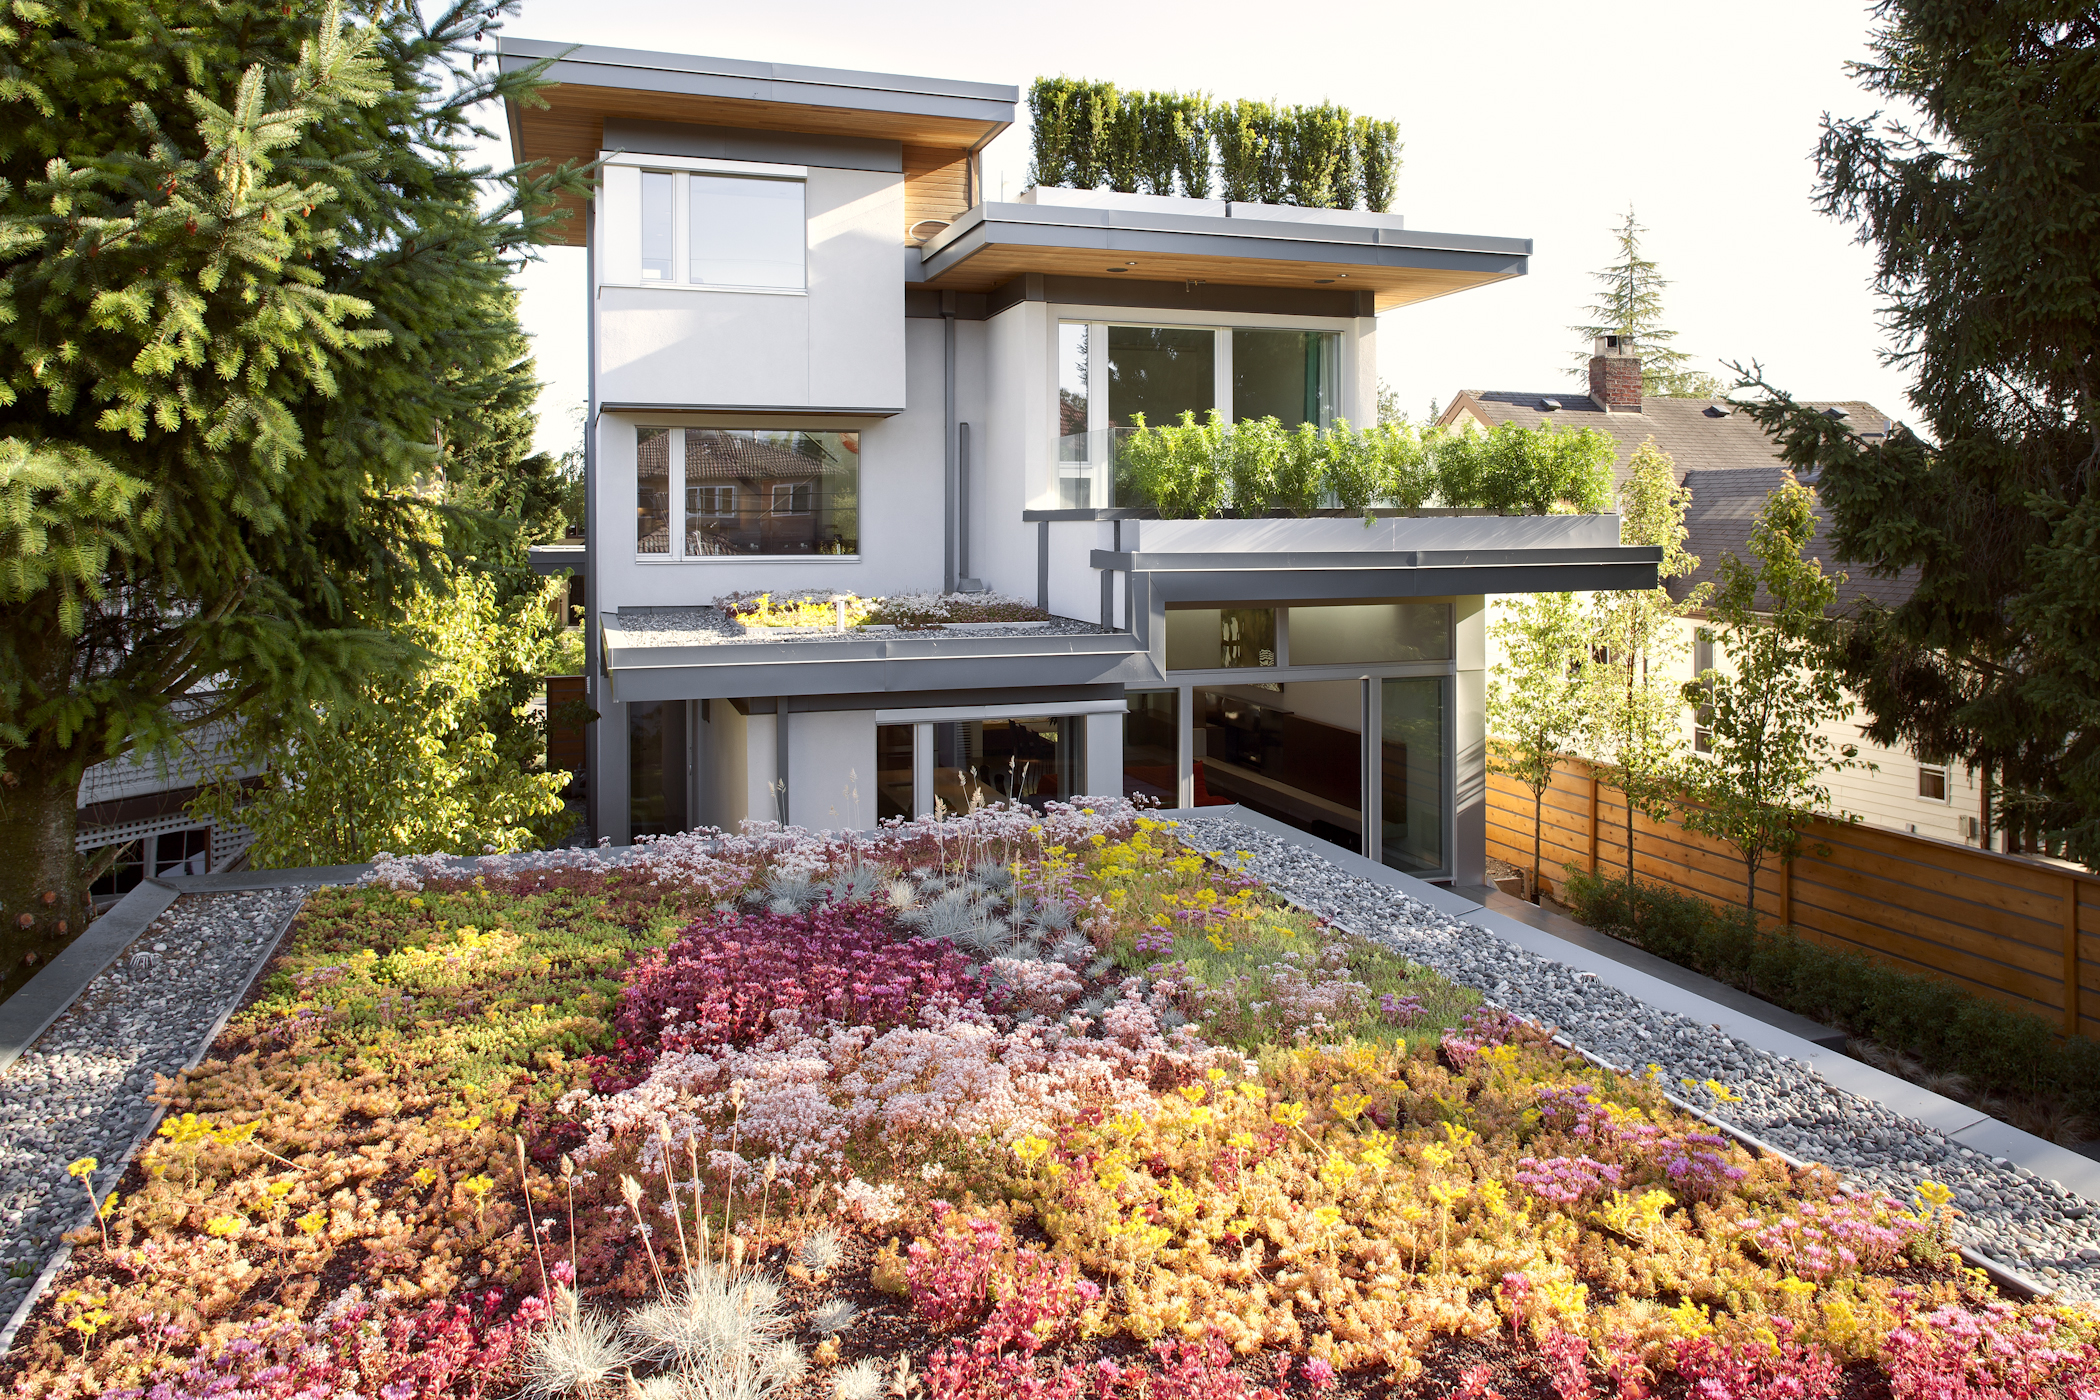 Back view of an environmentally friendly house in Vancouver.